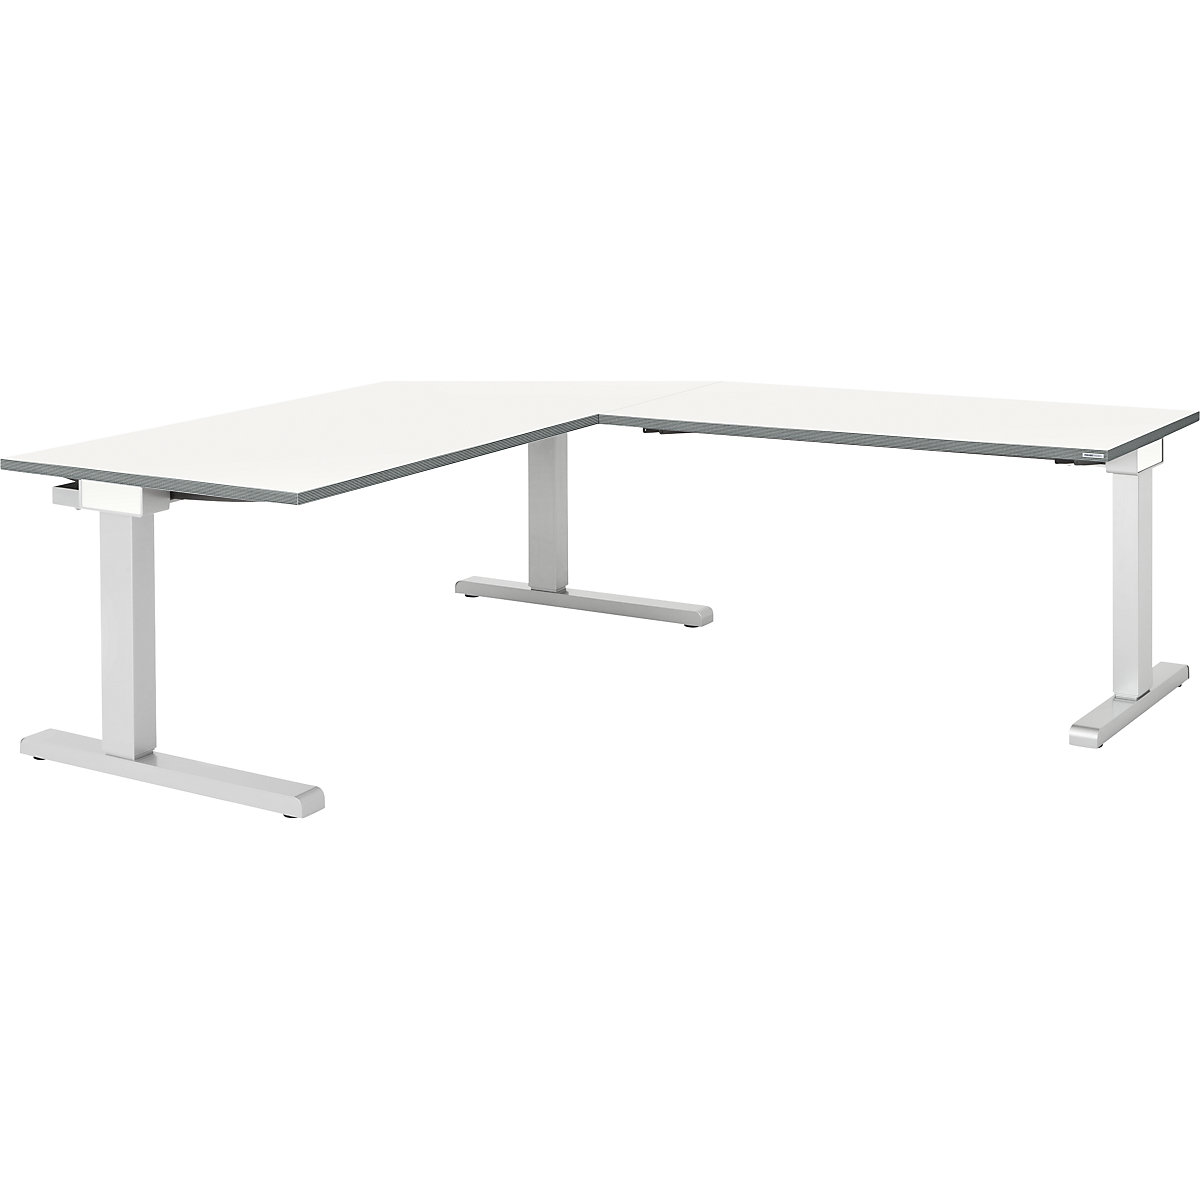 Desk, interlinked – mauser, WxD 1600 x 800 mm, angled extension on right (width 1200 mm), white top, white aluminium frame-3